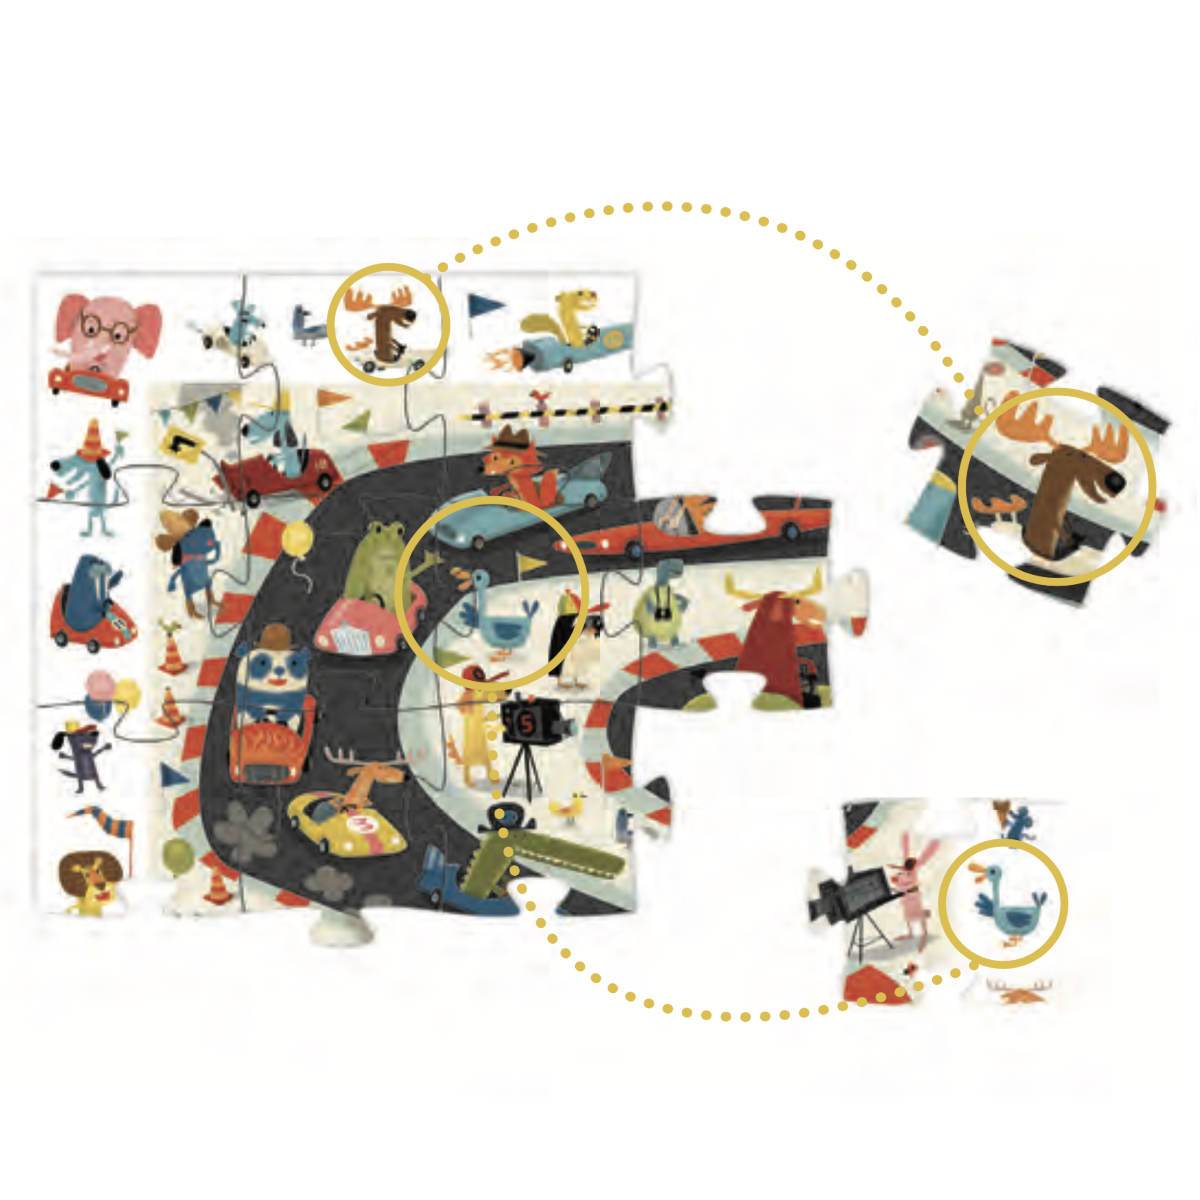 Automobile Rally 54pc Observation Jigsaw Puzzle + Poster